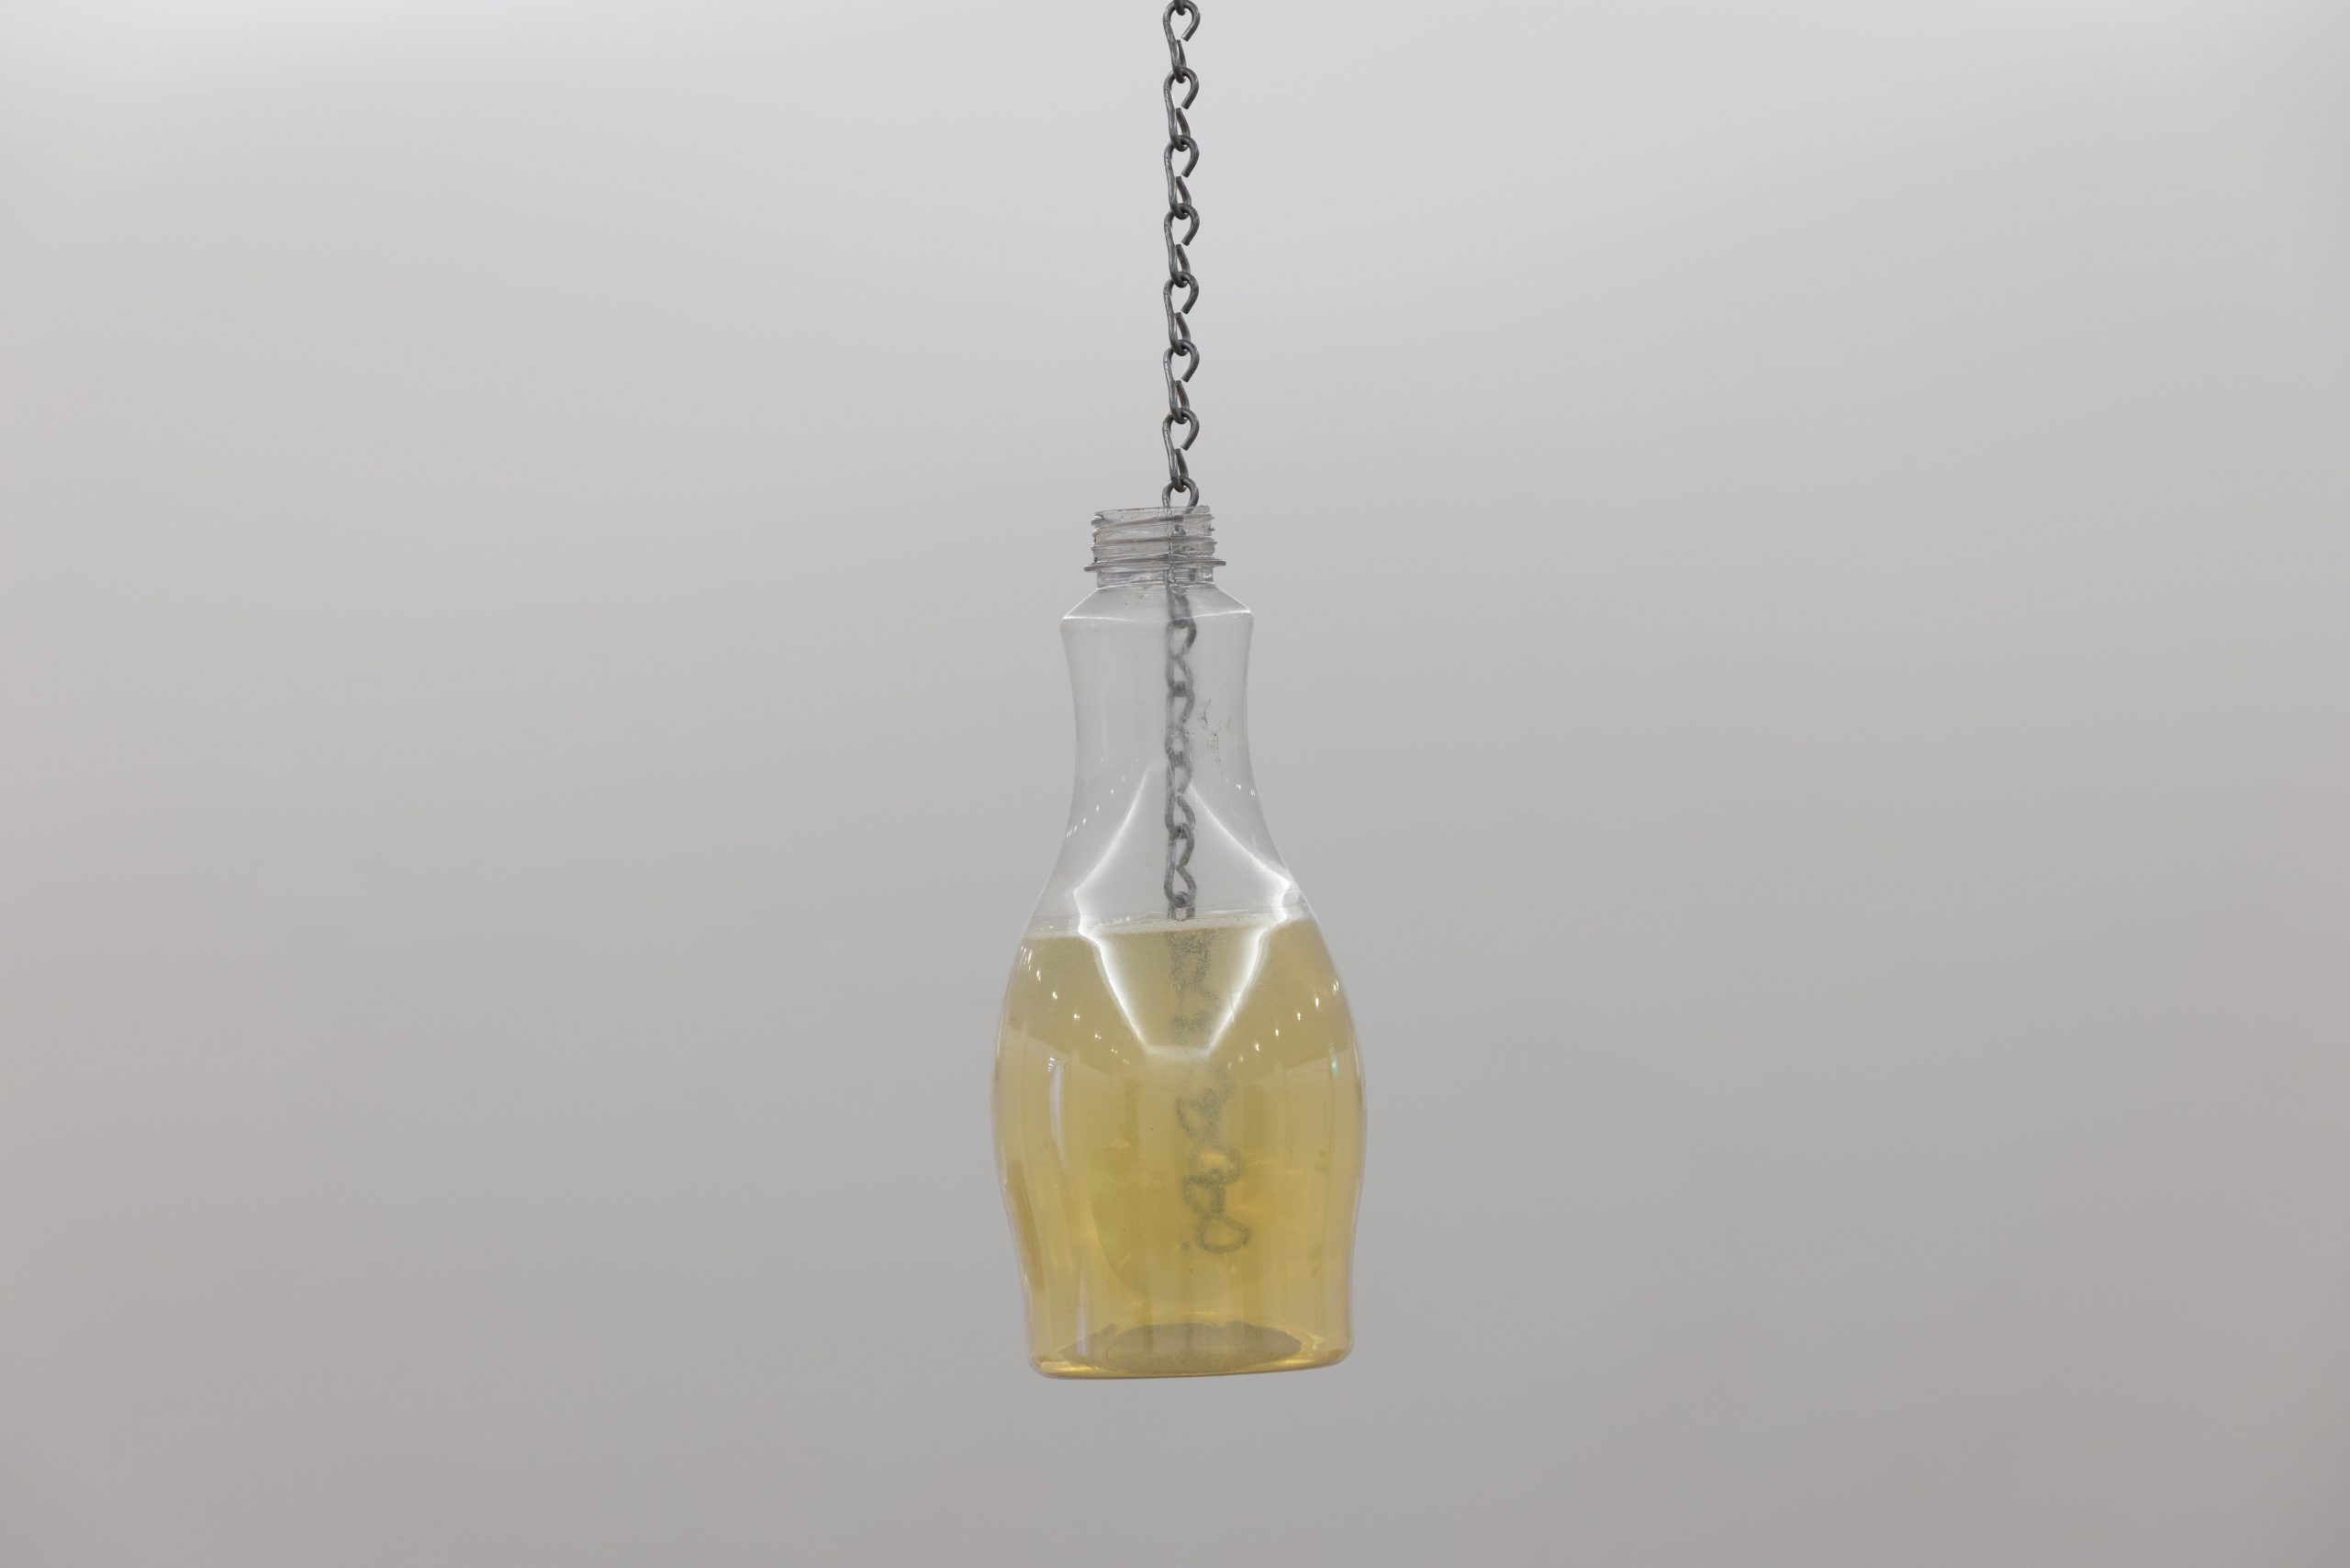 a plastic bottle filled with a yellow liquid, hanging from the ceiling by a chain submerged in the liquid.